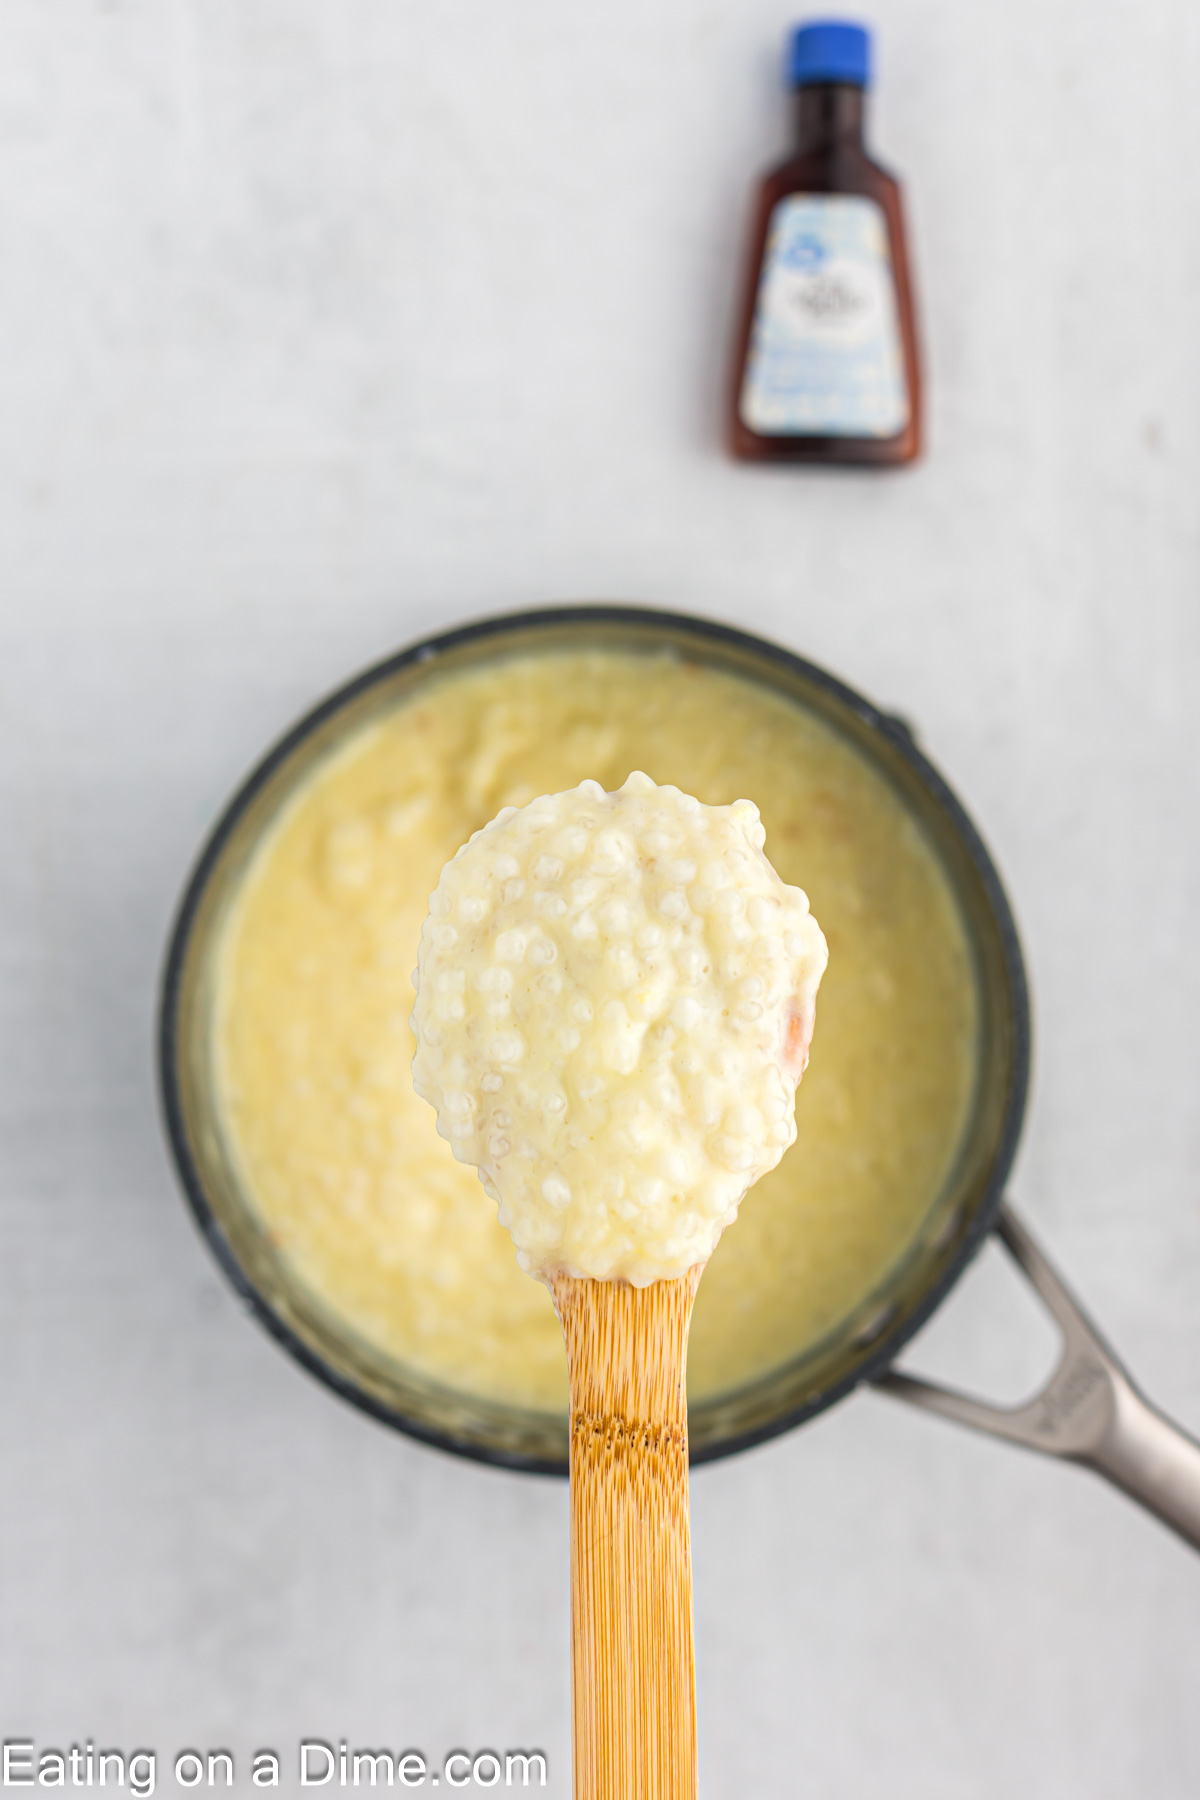 A wooden spoon with a serving of tapioca pudding with a saucepan of pudding in the background